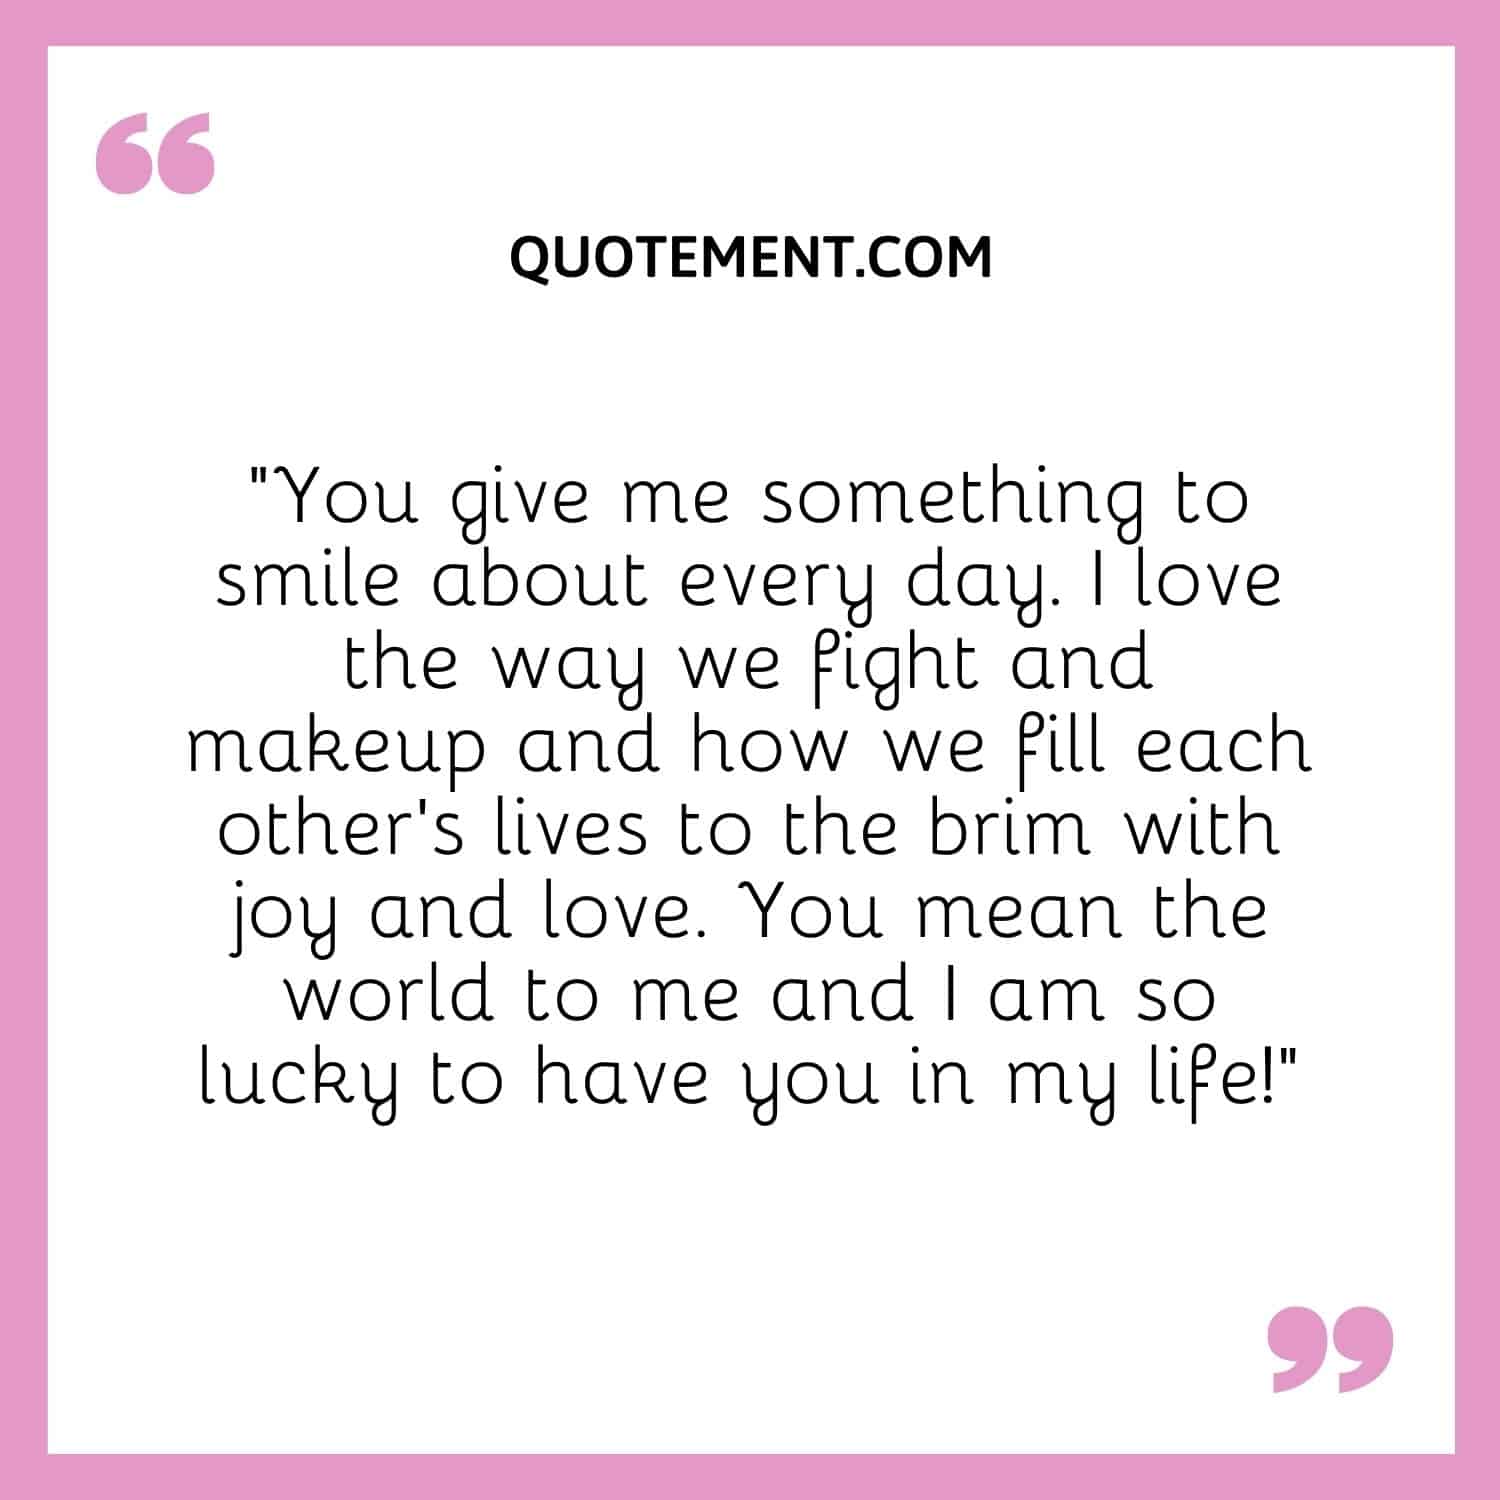 “You give me something to smile about every day. I love the way we fight and makeup and how we fill each other’s lives to the brim with joy and love.